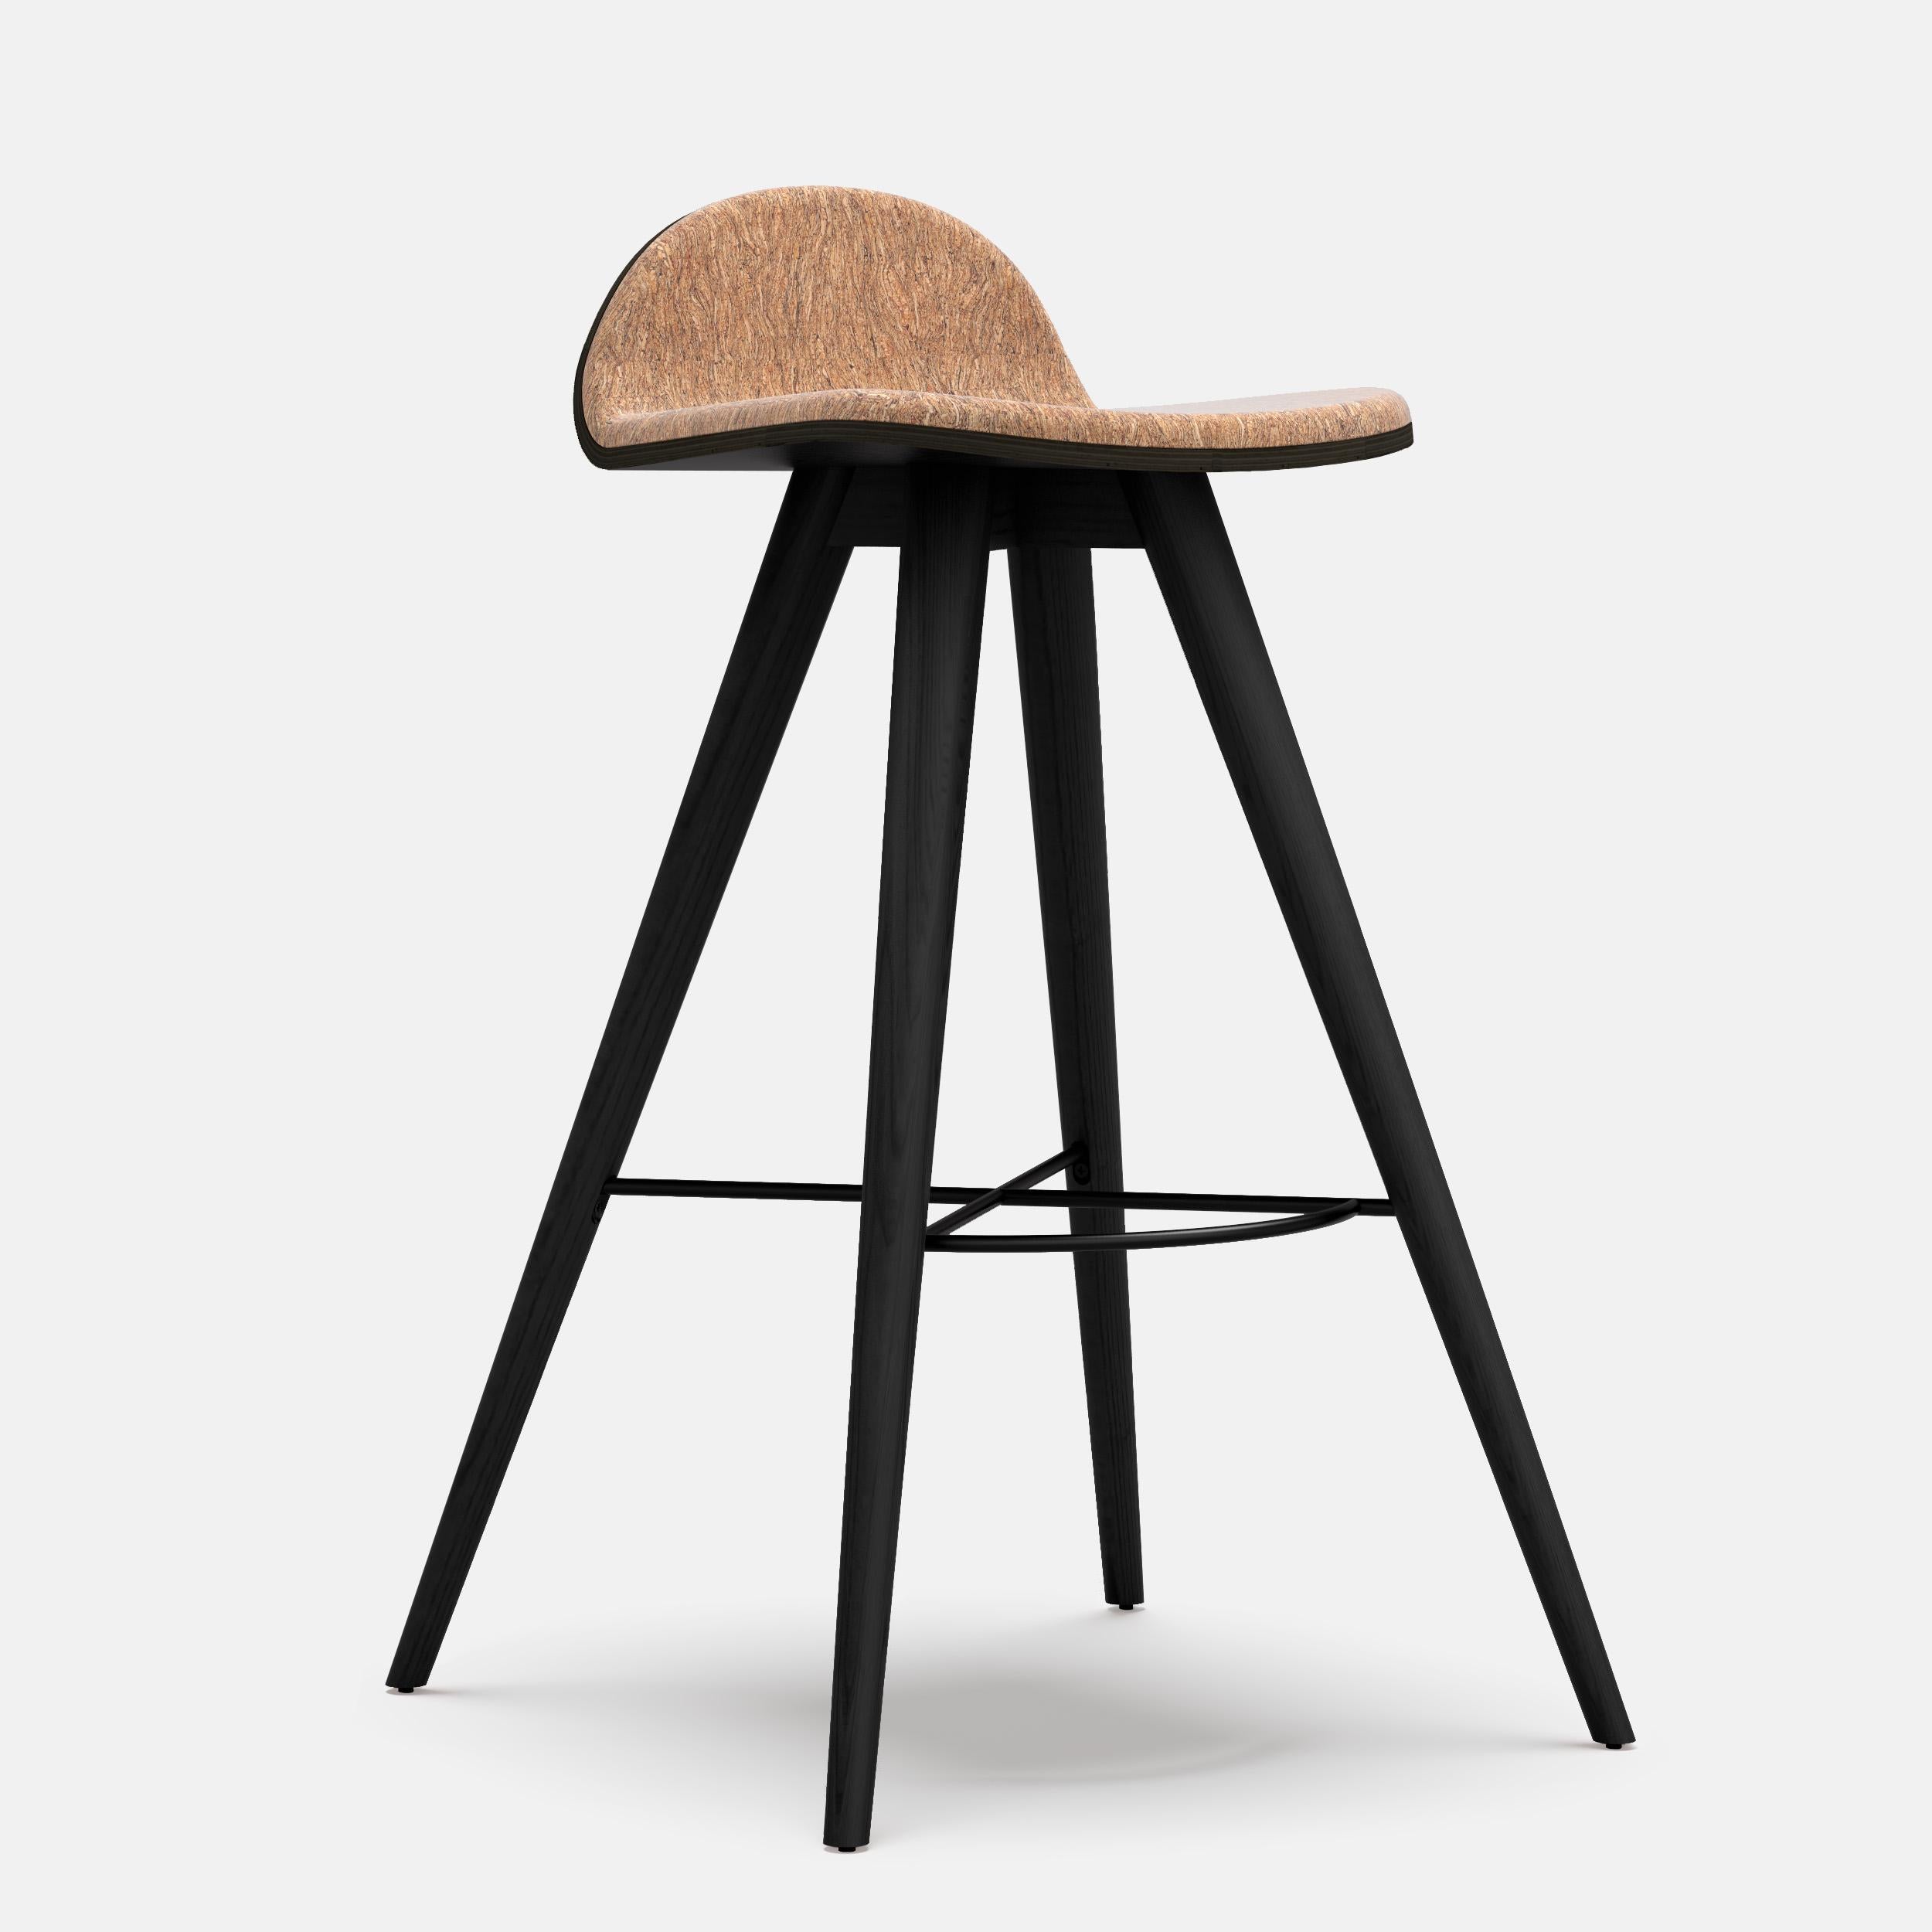 Painted ash and fabric contemporary high stool by Alexandre Caldas
Dimensions: W 51 x D 46 x H 100 cm
Materials: Painted black ash, corkfabric

Structure also available in beech, ash, oak, mix wood
Seat also available in fabric, leather,